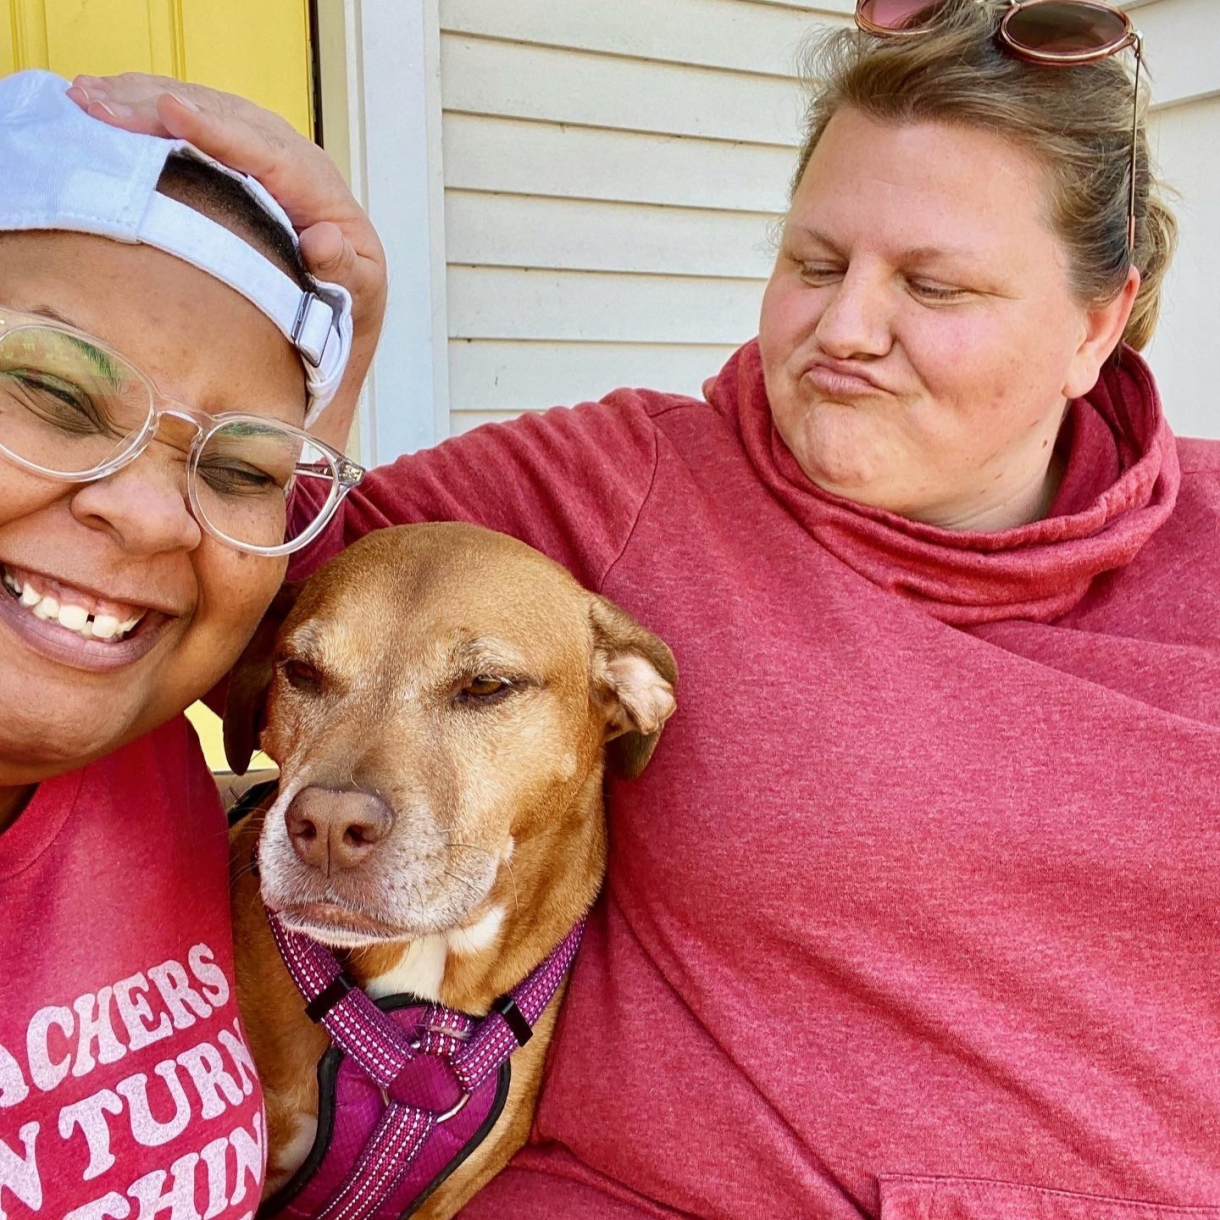 shea, a Black nonbinary human, and Jane, a white woman, pose with the dog, LilyPad. LilyPad has a tan coat. Both shea and Jane are wearing pink. shea also has on clear glasses and a backwards baseball cap. shea is smiling. Jane has her hand on shea's head and is kind of scrunching up her lips.